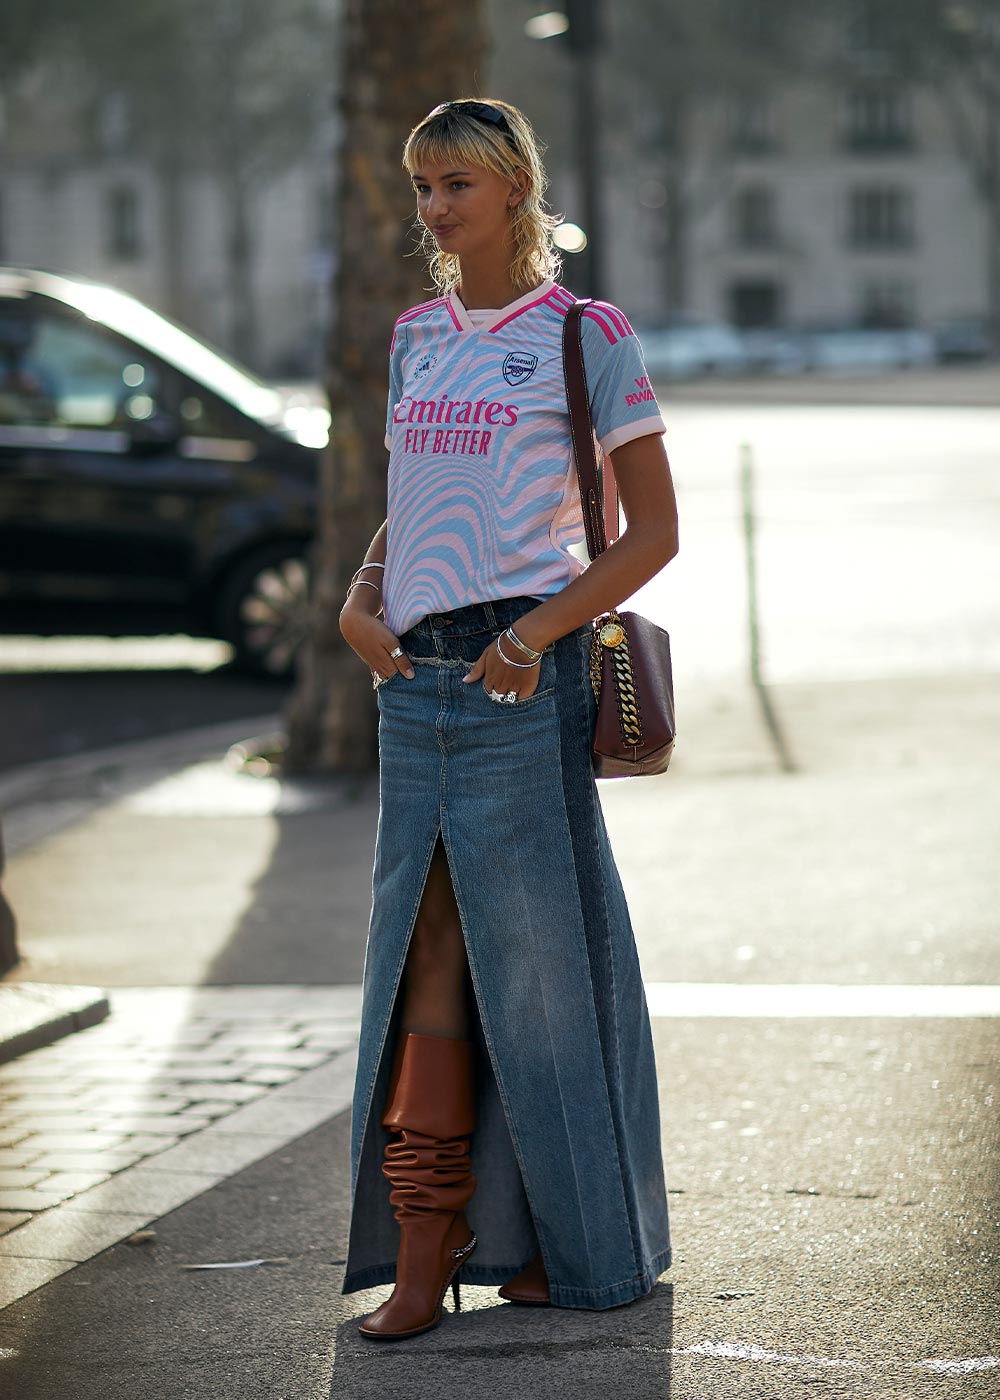 Street Style: Pastell Flop